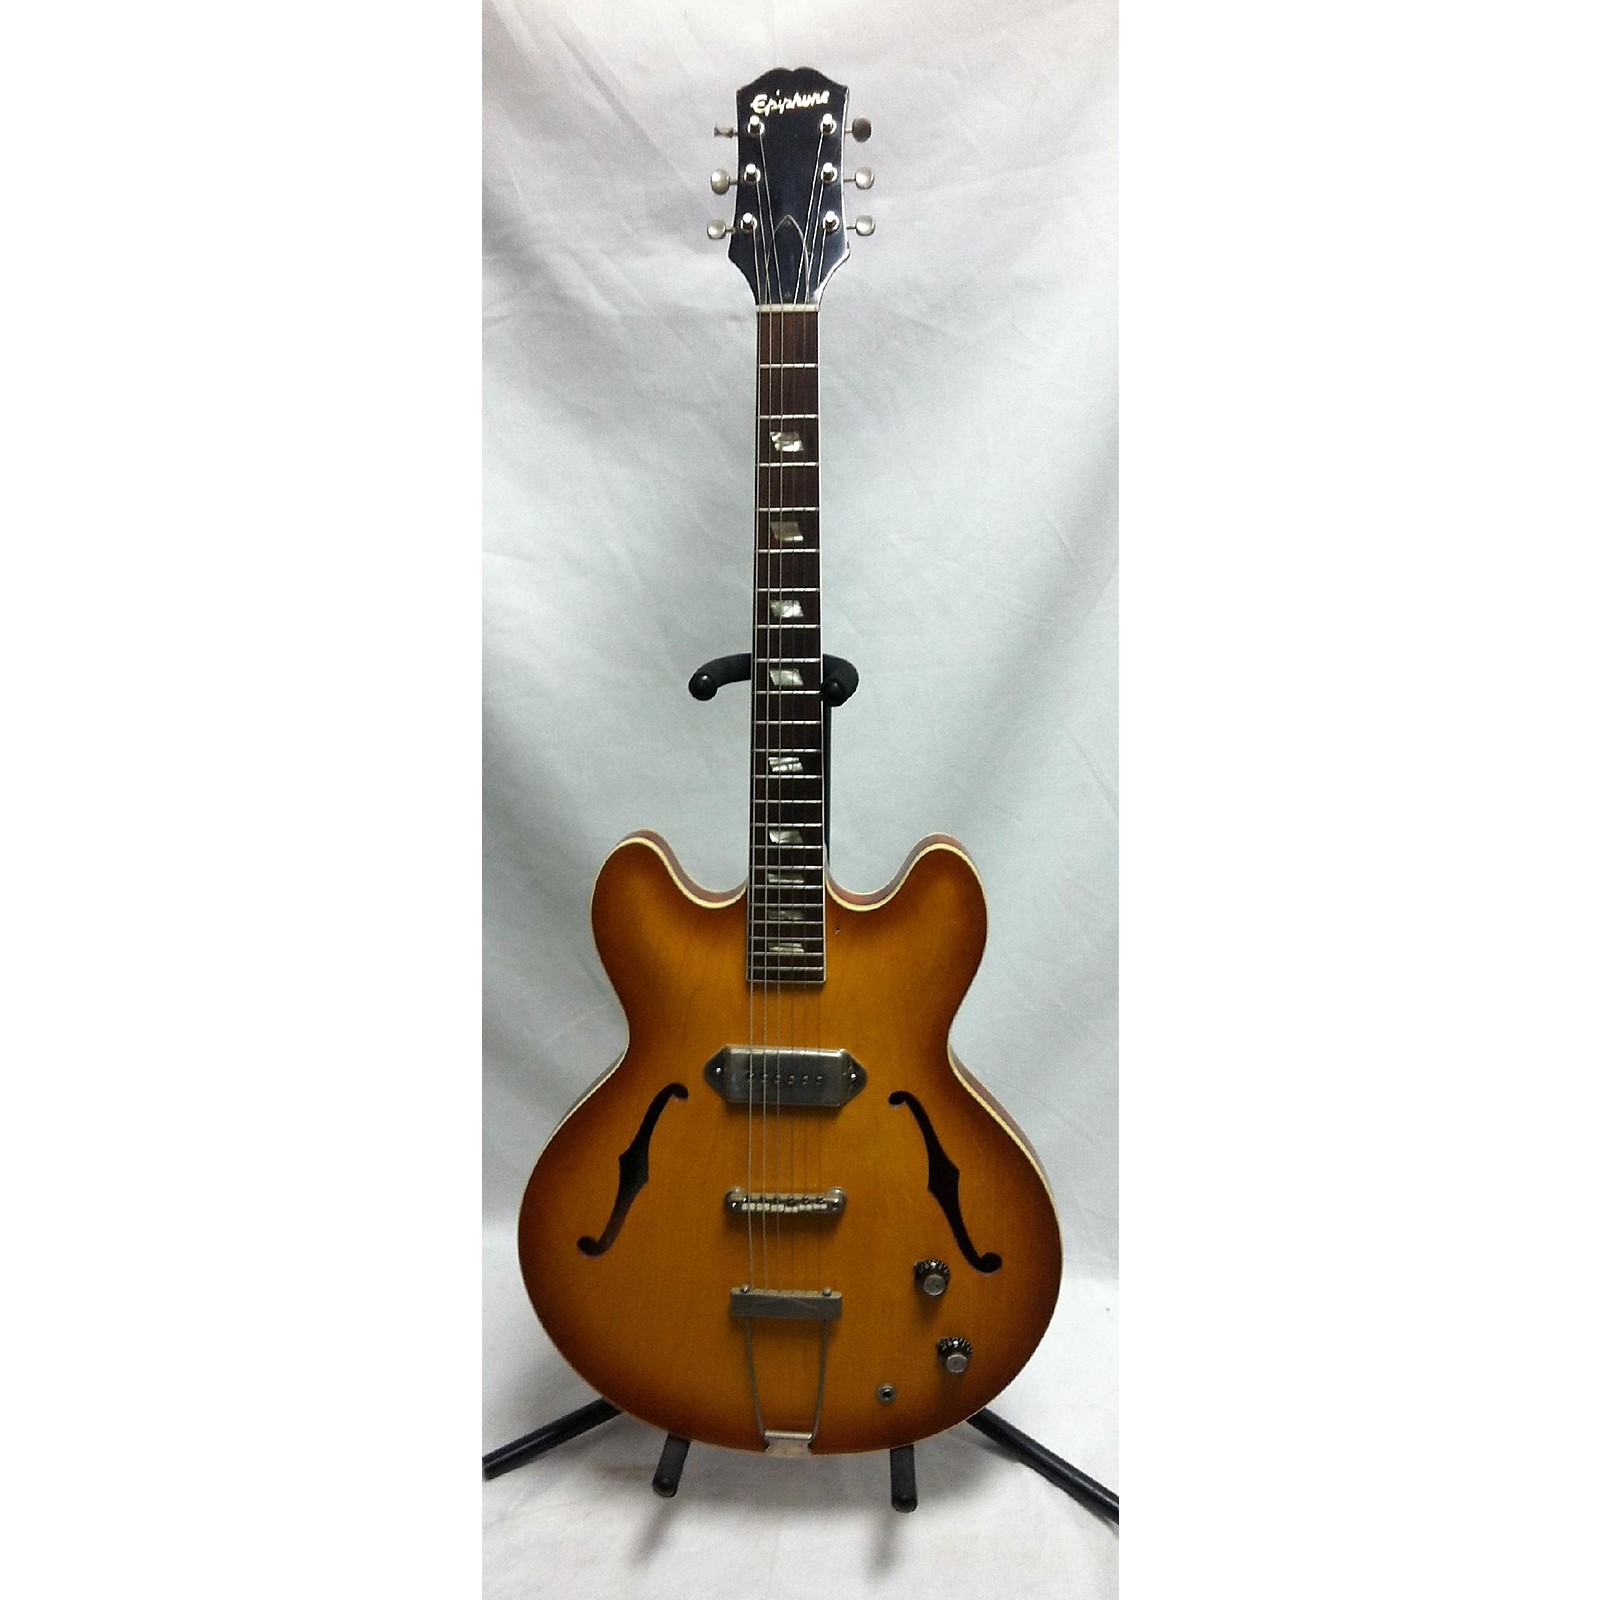 epiphone casino archtop hollowbody electric guitar natural